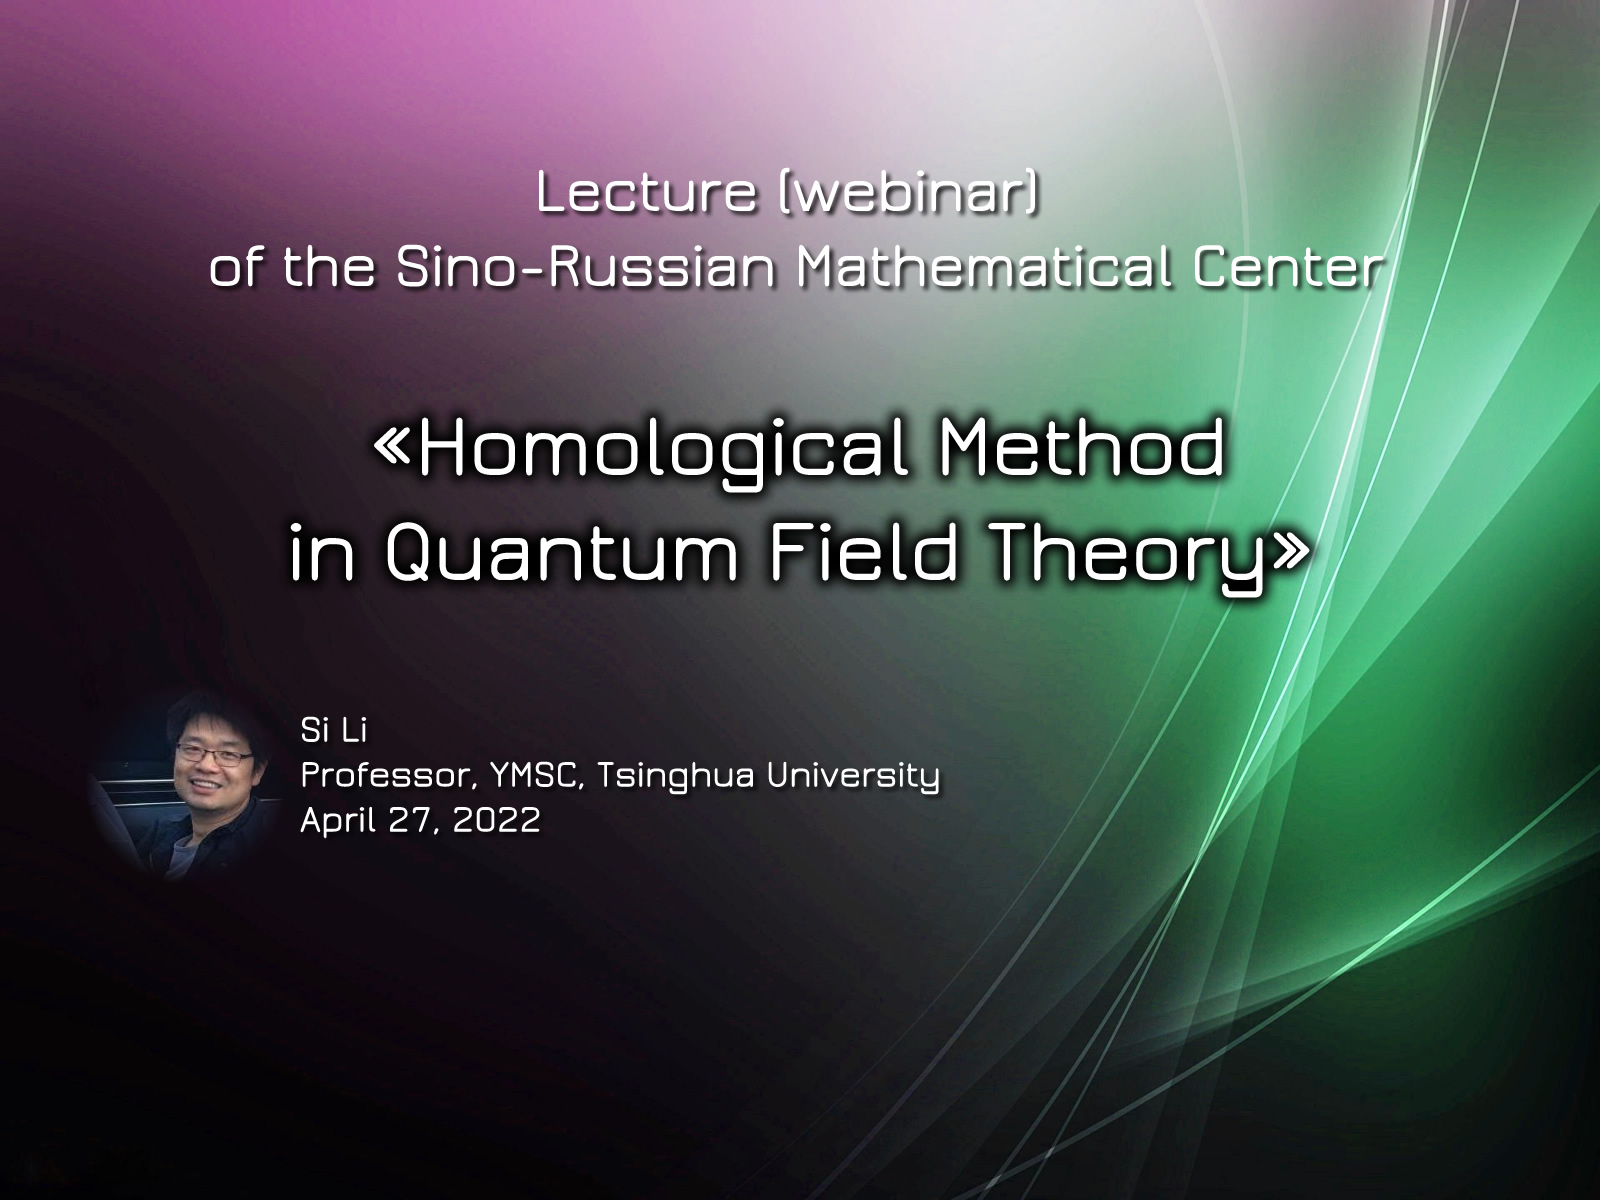 «Homological Method in Quantum Field Theory» 27.04.2022